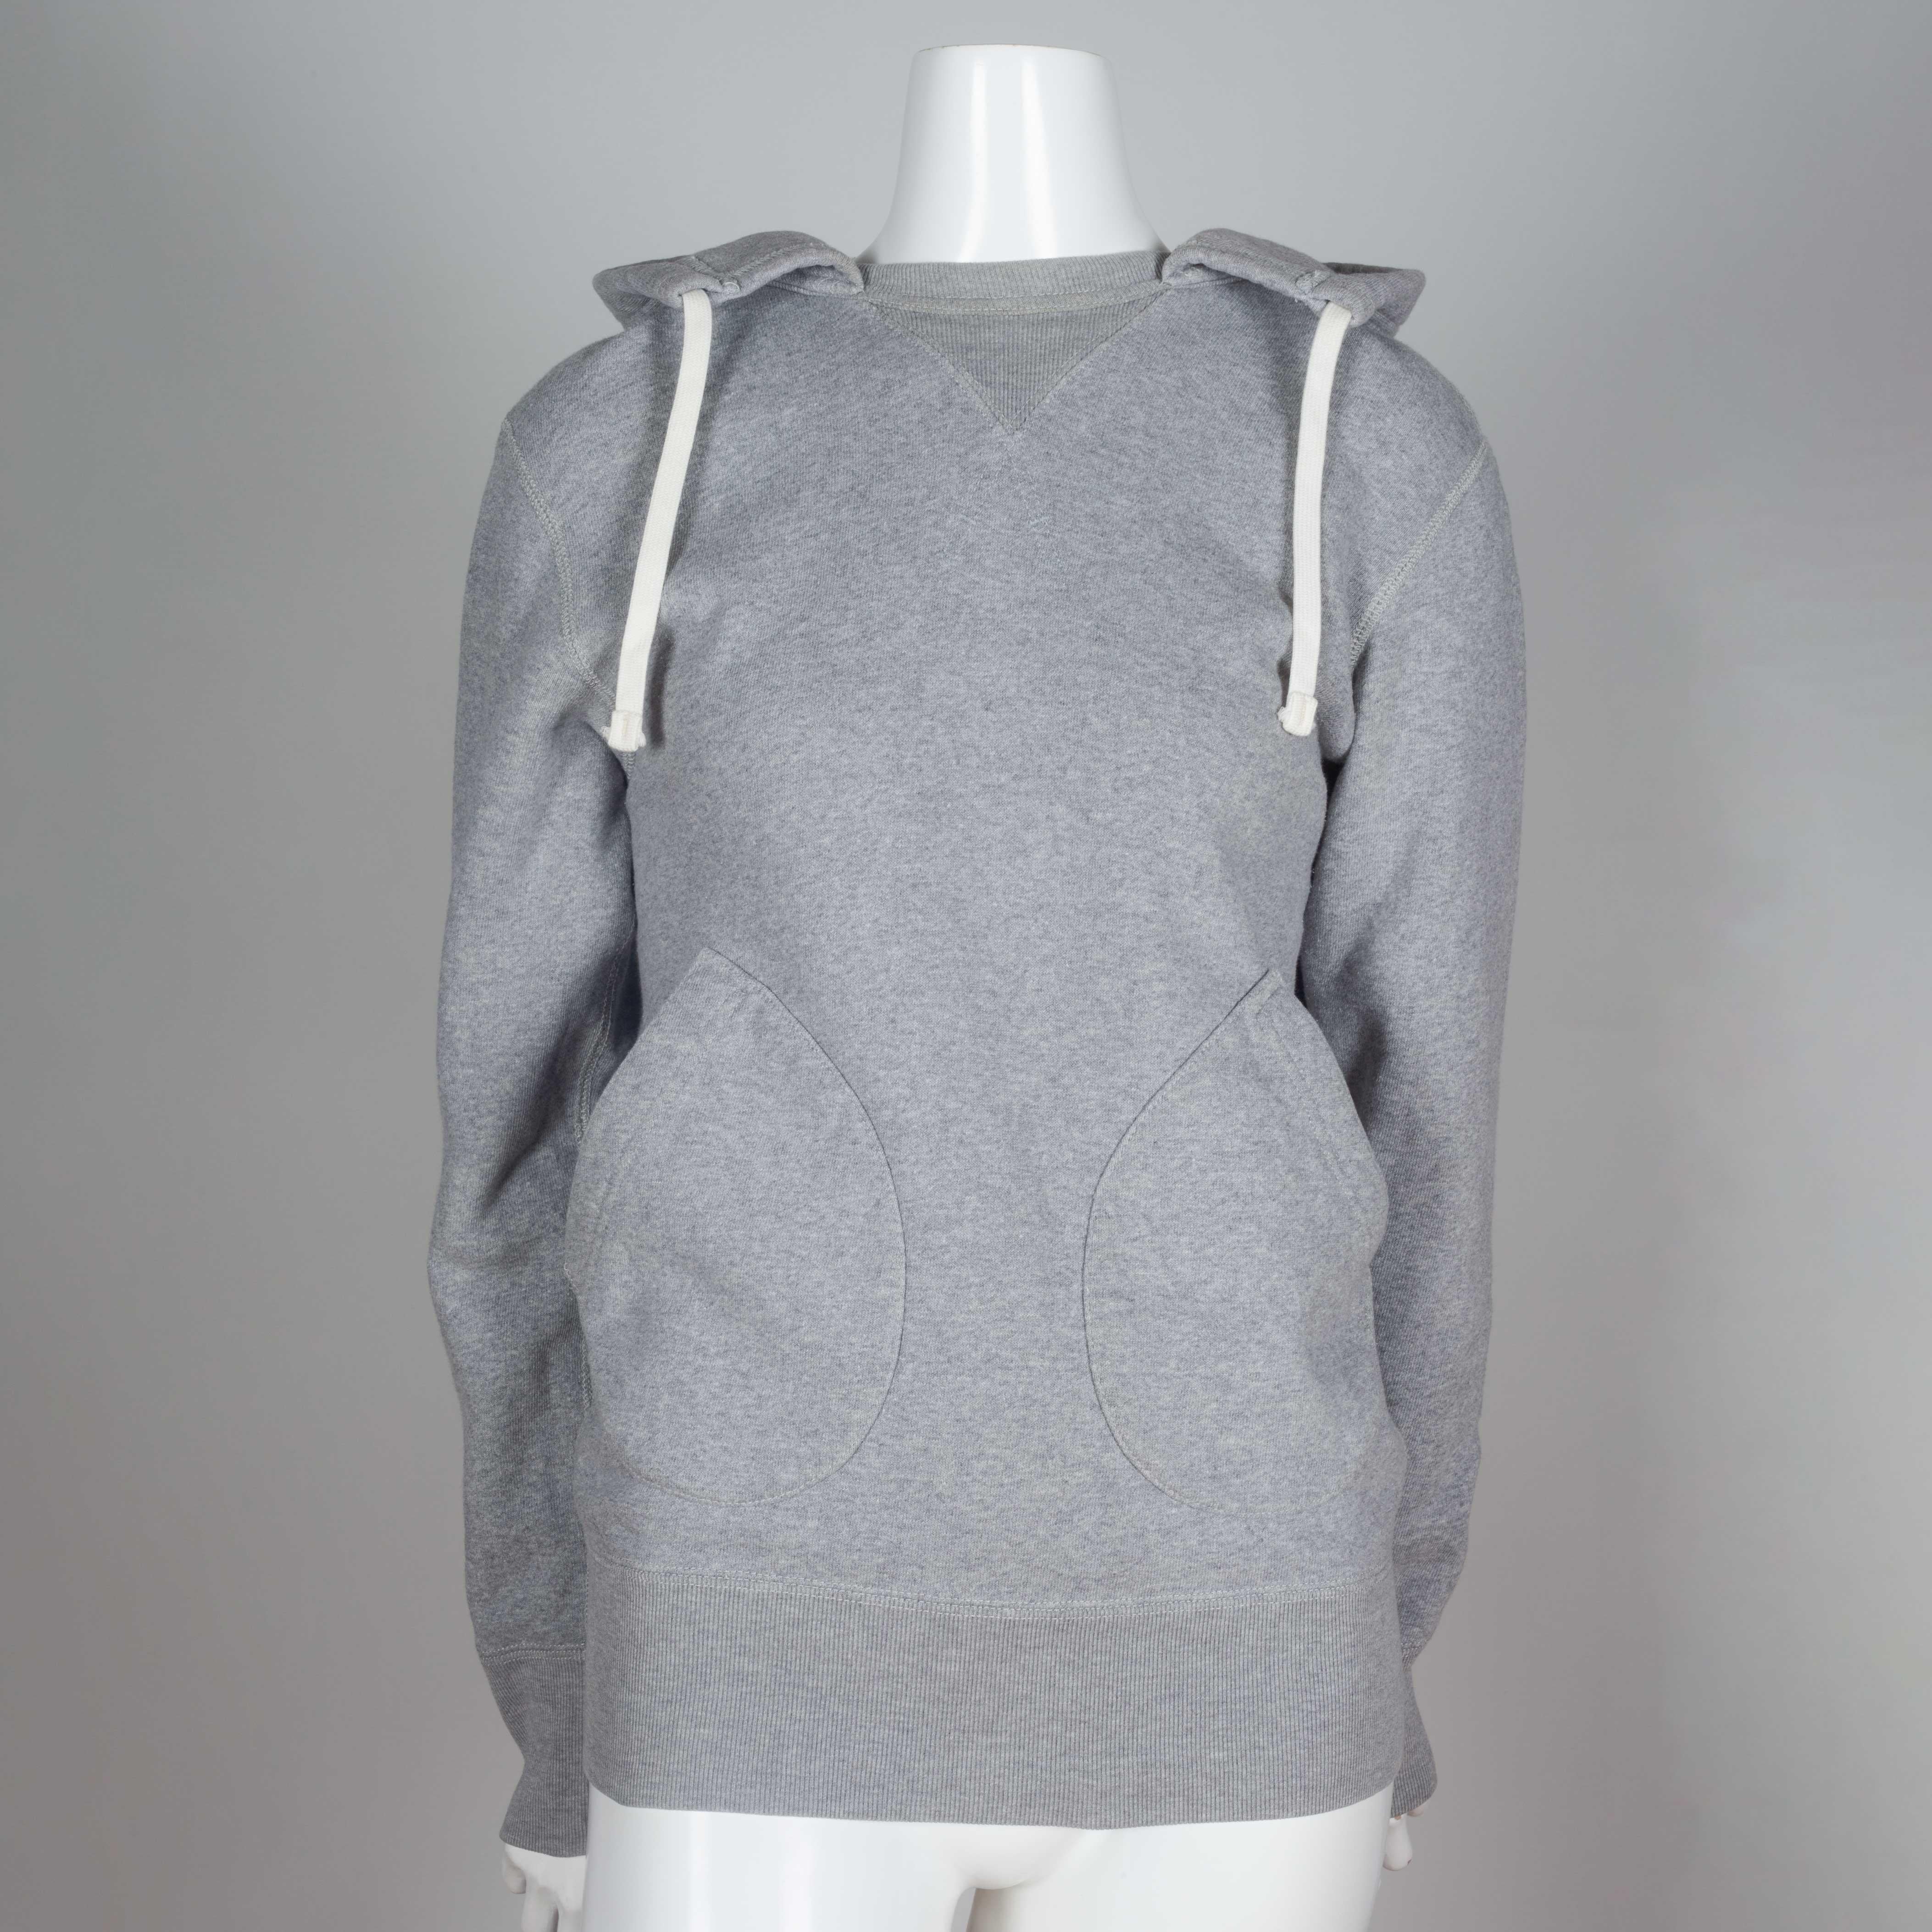 Gray hooded sweatshirt by eYe Junya Watanabe Man Comme des Garçons 2012. Draw string hood, exterior stitching and rounded pouch pockets in the front. Casual hoodie for chilling.

YEAR: 2012
MARKED SIZE: S
US WOMEN'S: S
US MEN'S: XS
FIT: